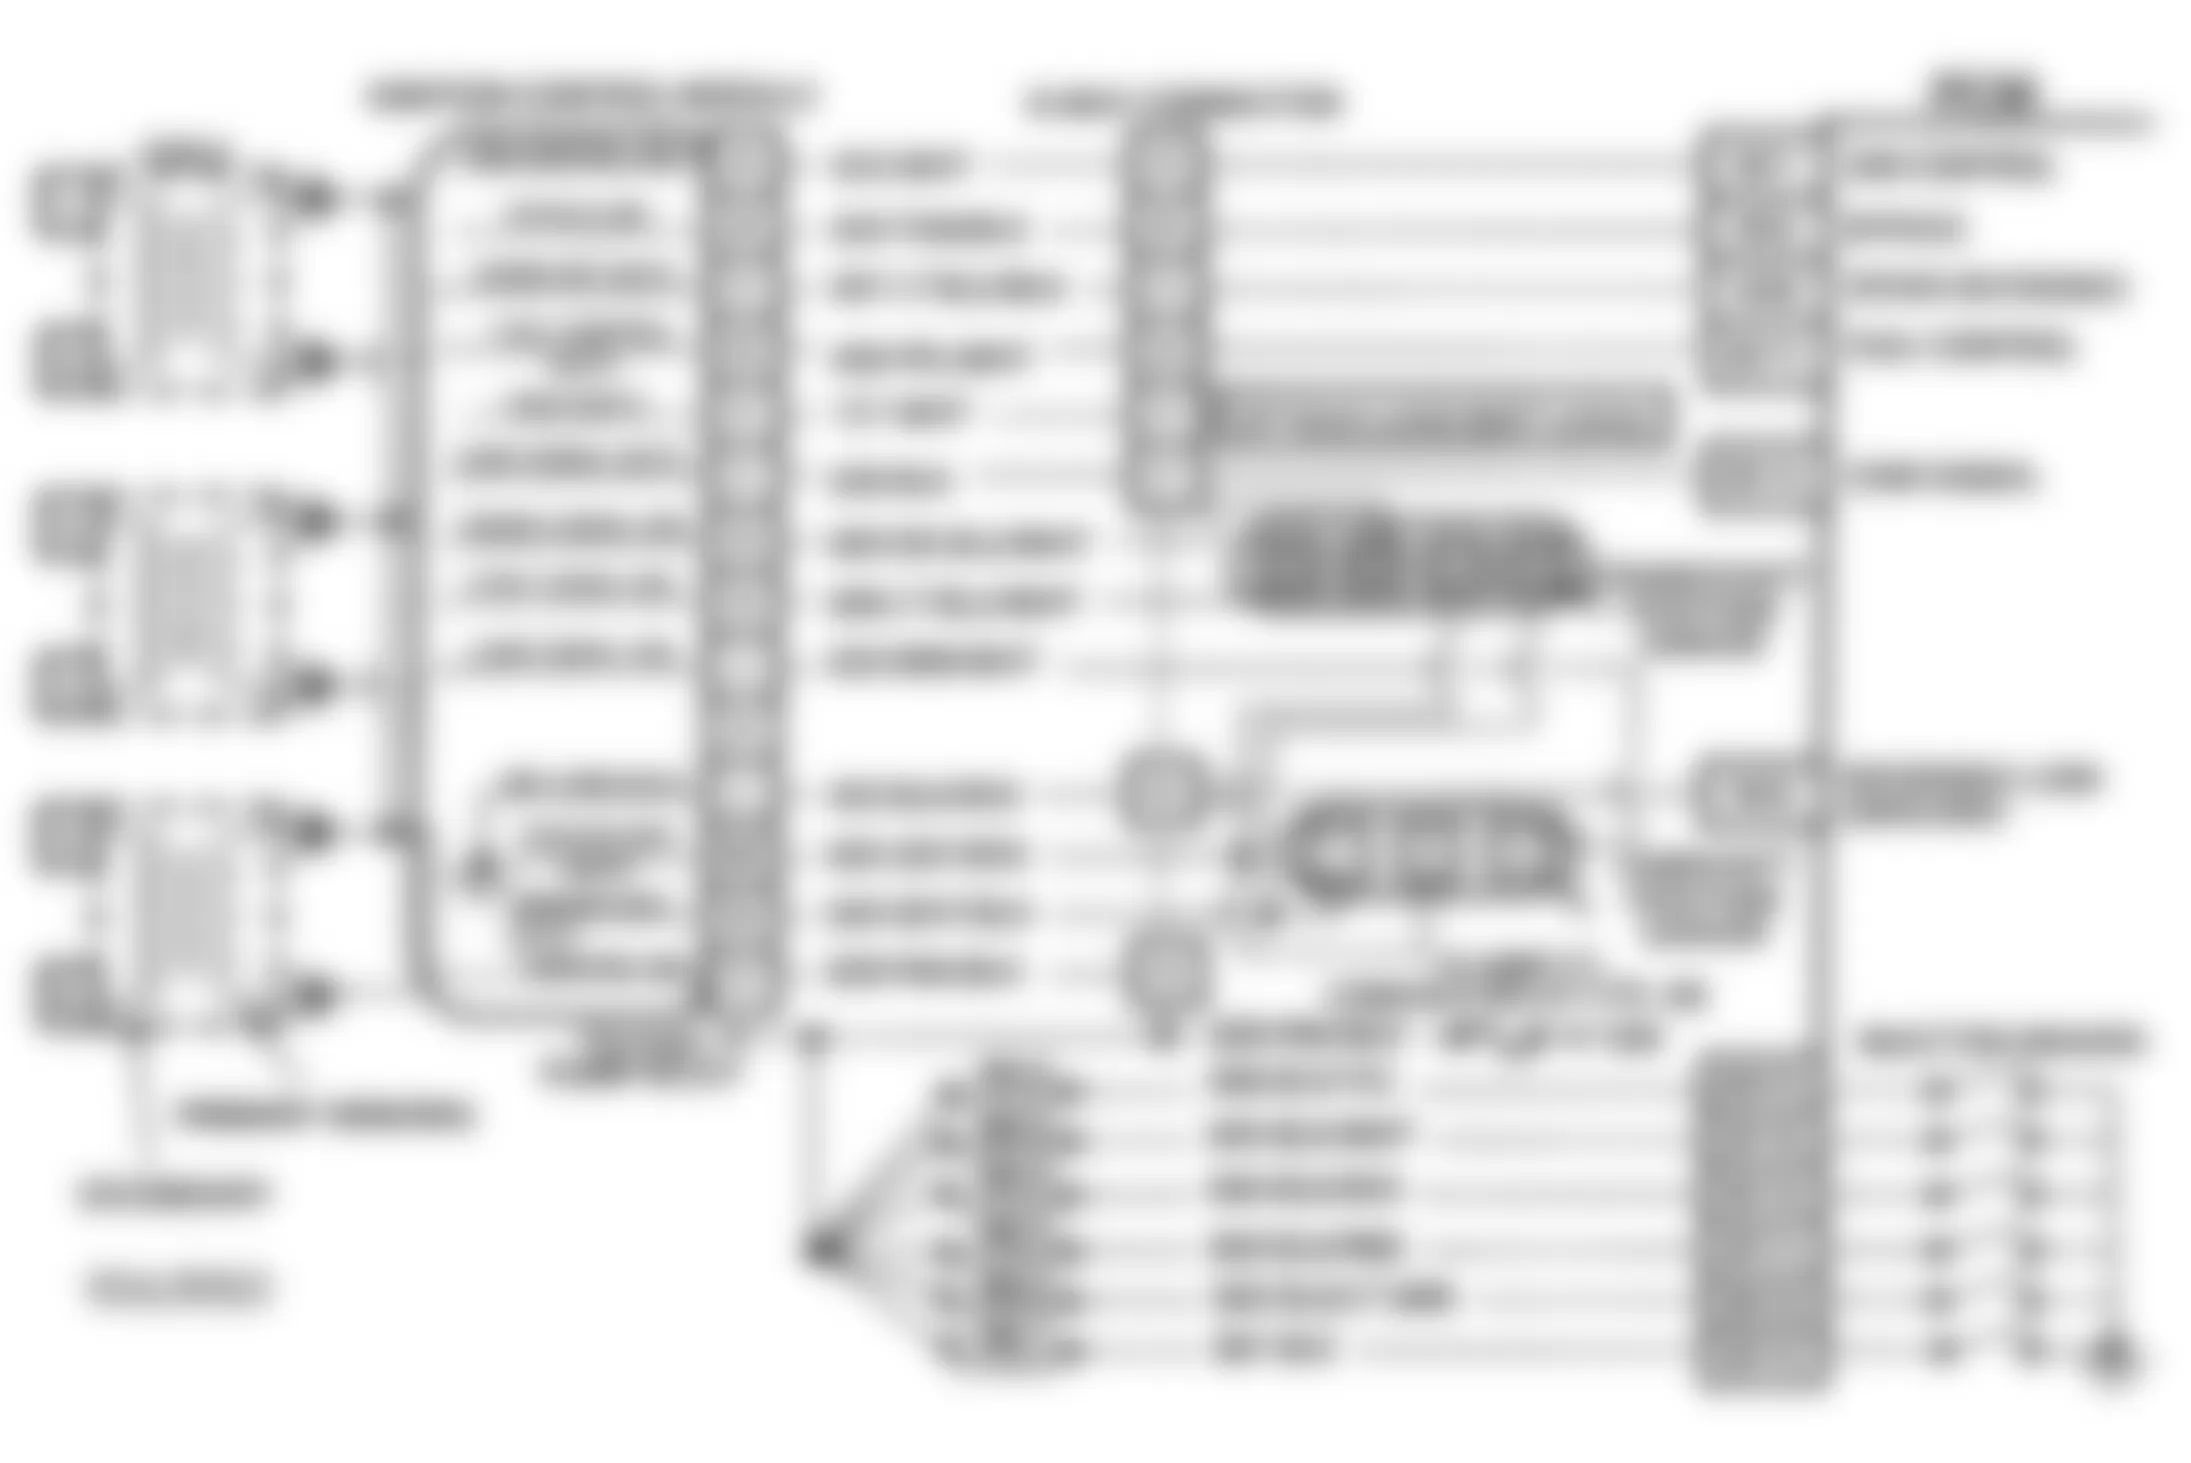 Buick Riviera 1993 - Component Locations -  Code 42 Schematic (3.8L E Body) EST Circuit Open Or Grounded